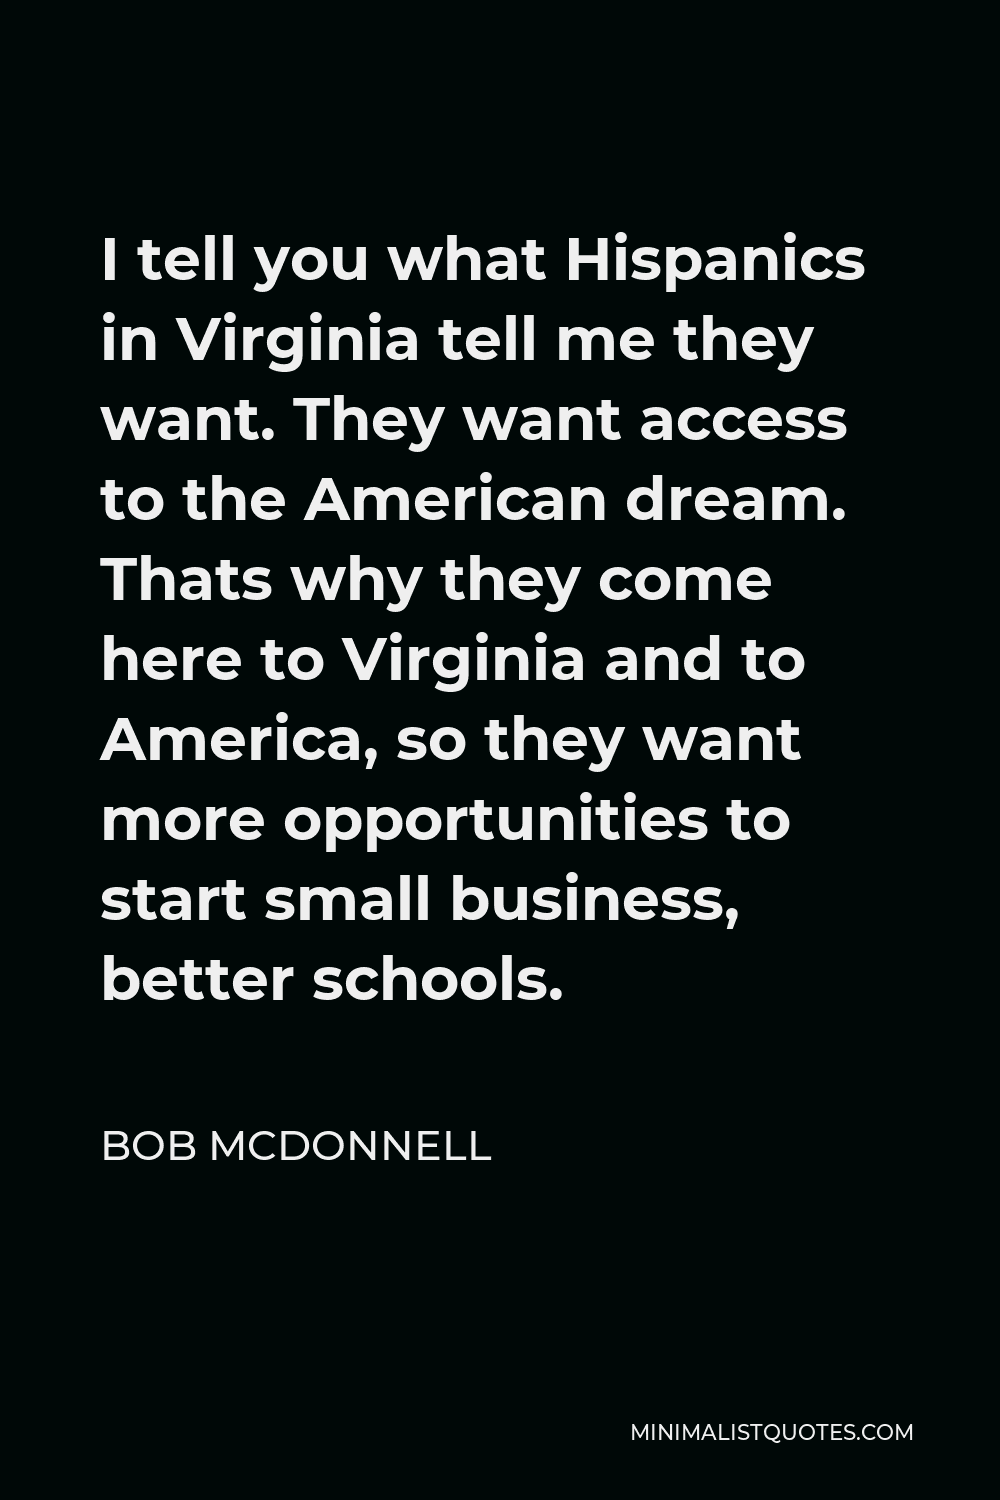 Bob McDonnell Quote - I tell you what Hispanics in Virginia tell me they want. They want access to the American dream. Thats why they come here to Virginia and to America, so they want more opportunities to start small business, better schools.